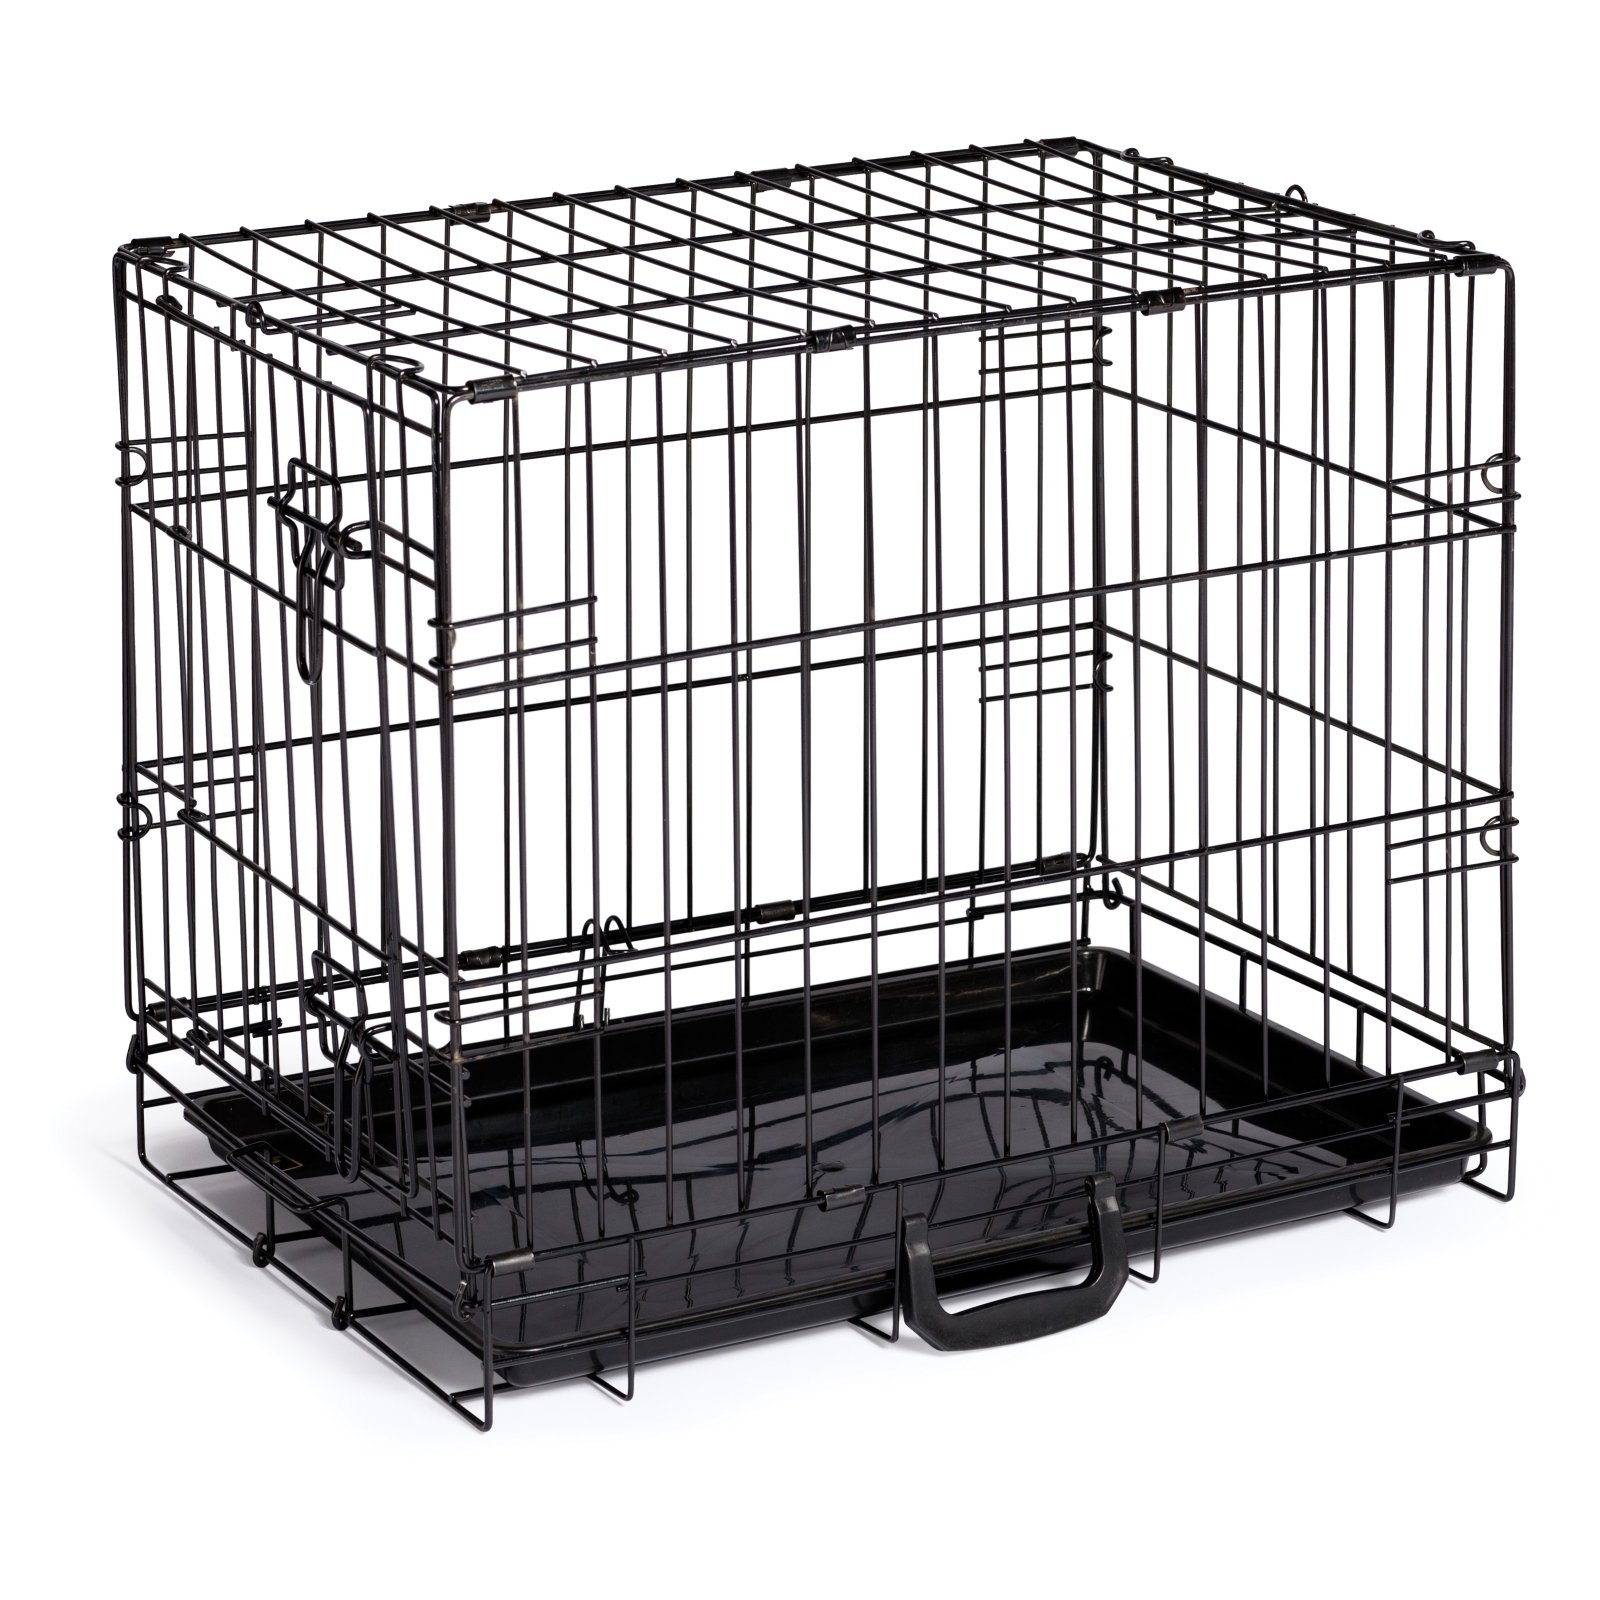 Prevue Pet Products Home On-The-Go Dog Crate, X-Small, 24"L x 16.50"W x 20"H - image 1 of 7